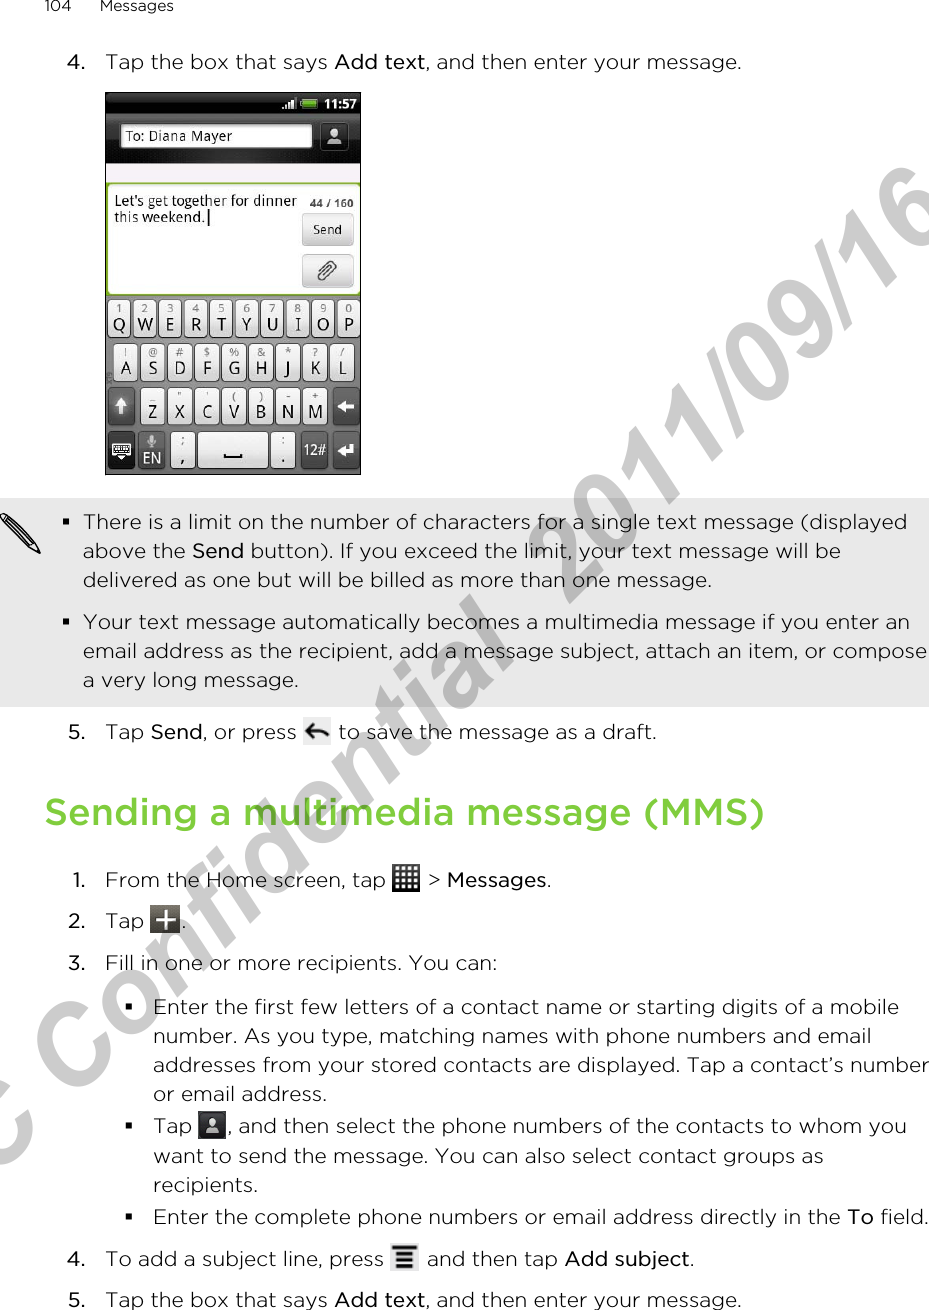 4. Tap the box that says Add text, and then enter your message. §There is a limit on the number of characters for a single text message (displayedabove the Send button). If you exceed the limit, your text message will bedelivered as one but will be billed as more than one message.§Your text message automatically becomes a multimedia message if you enter anemail address as the recipient, add a message subject, attach an item, or composea very long message.5. Tap Send, or press   to save the message as a draft.Sending a multimedia message (MMS)1. From the Home screen, tap   &gt; Messages.2. Tap  .3. Fill in one or more recipients. You can:§Enter the first few letters of a contact name or starting digits of a mobilenumber. As you type, matching names with phone numbers and emailaddresses from your stored contacts are displayed. Tap a contact’s numberor email address.§Tap  , and then select the phone numbers of the contacts to whom youwant to send the message. You can also select contact groups asrecipients.§Enter the complete phone numbers or email address directly in the To field.4. To add a subject line, press   and then tap Add subject.5. Tap the box that says Add text, and then enter your message.104 MessagesHTC Confidential  2011/09/16 